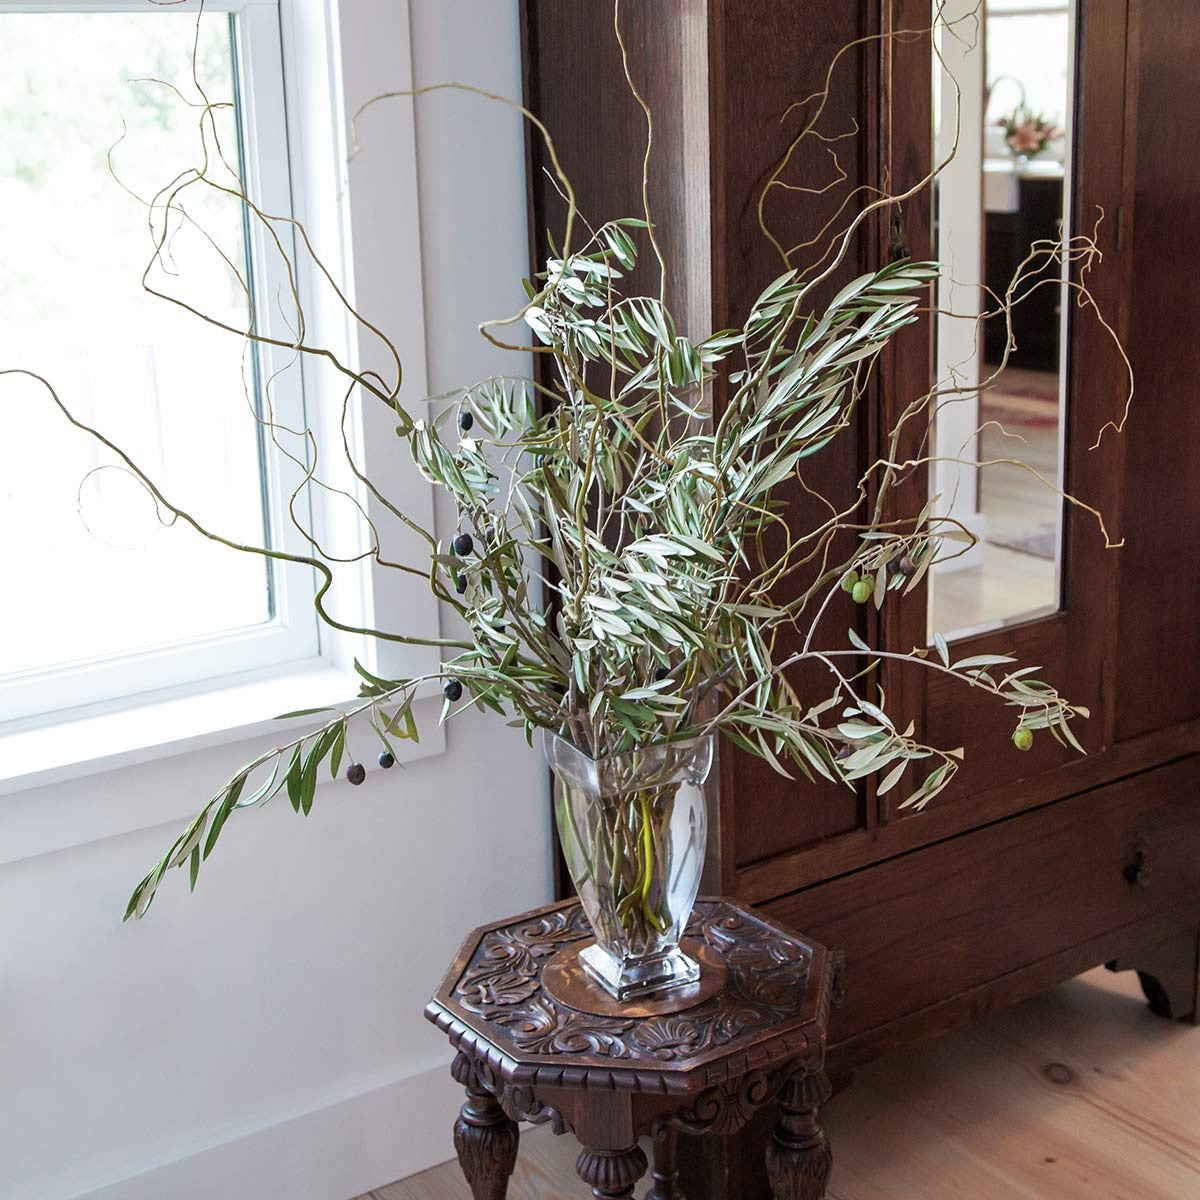 large regal vase filled with olive branches and curly willow